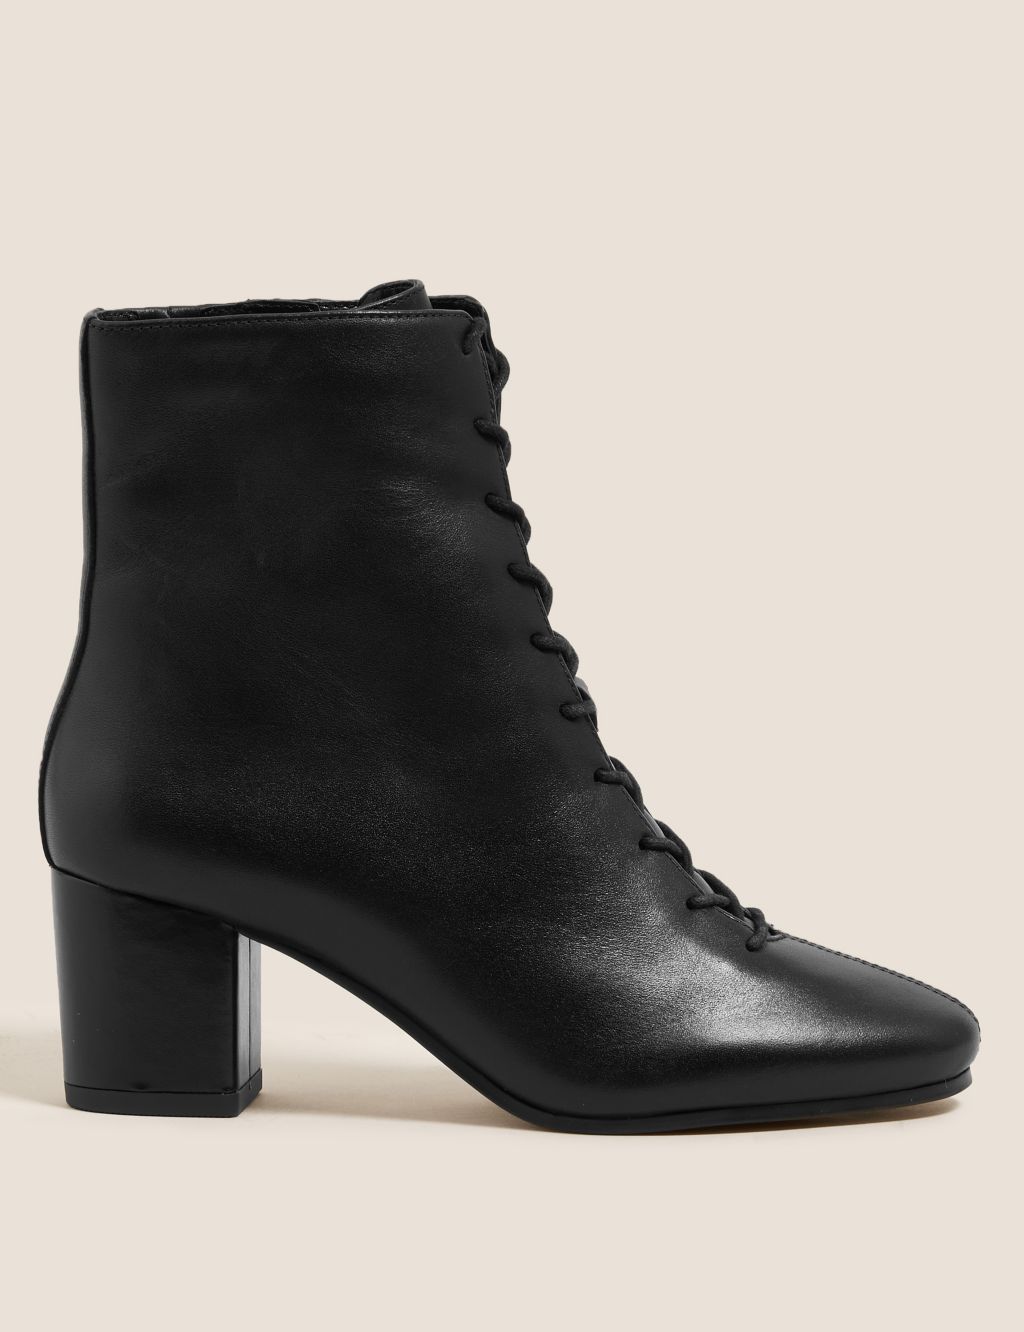 Leather Lace Up Block Heel Ankle Boots | M&S Collection | M&S